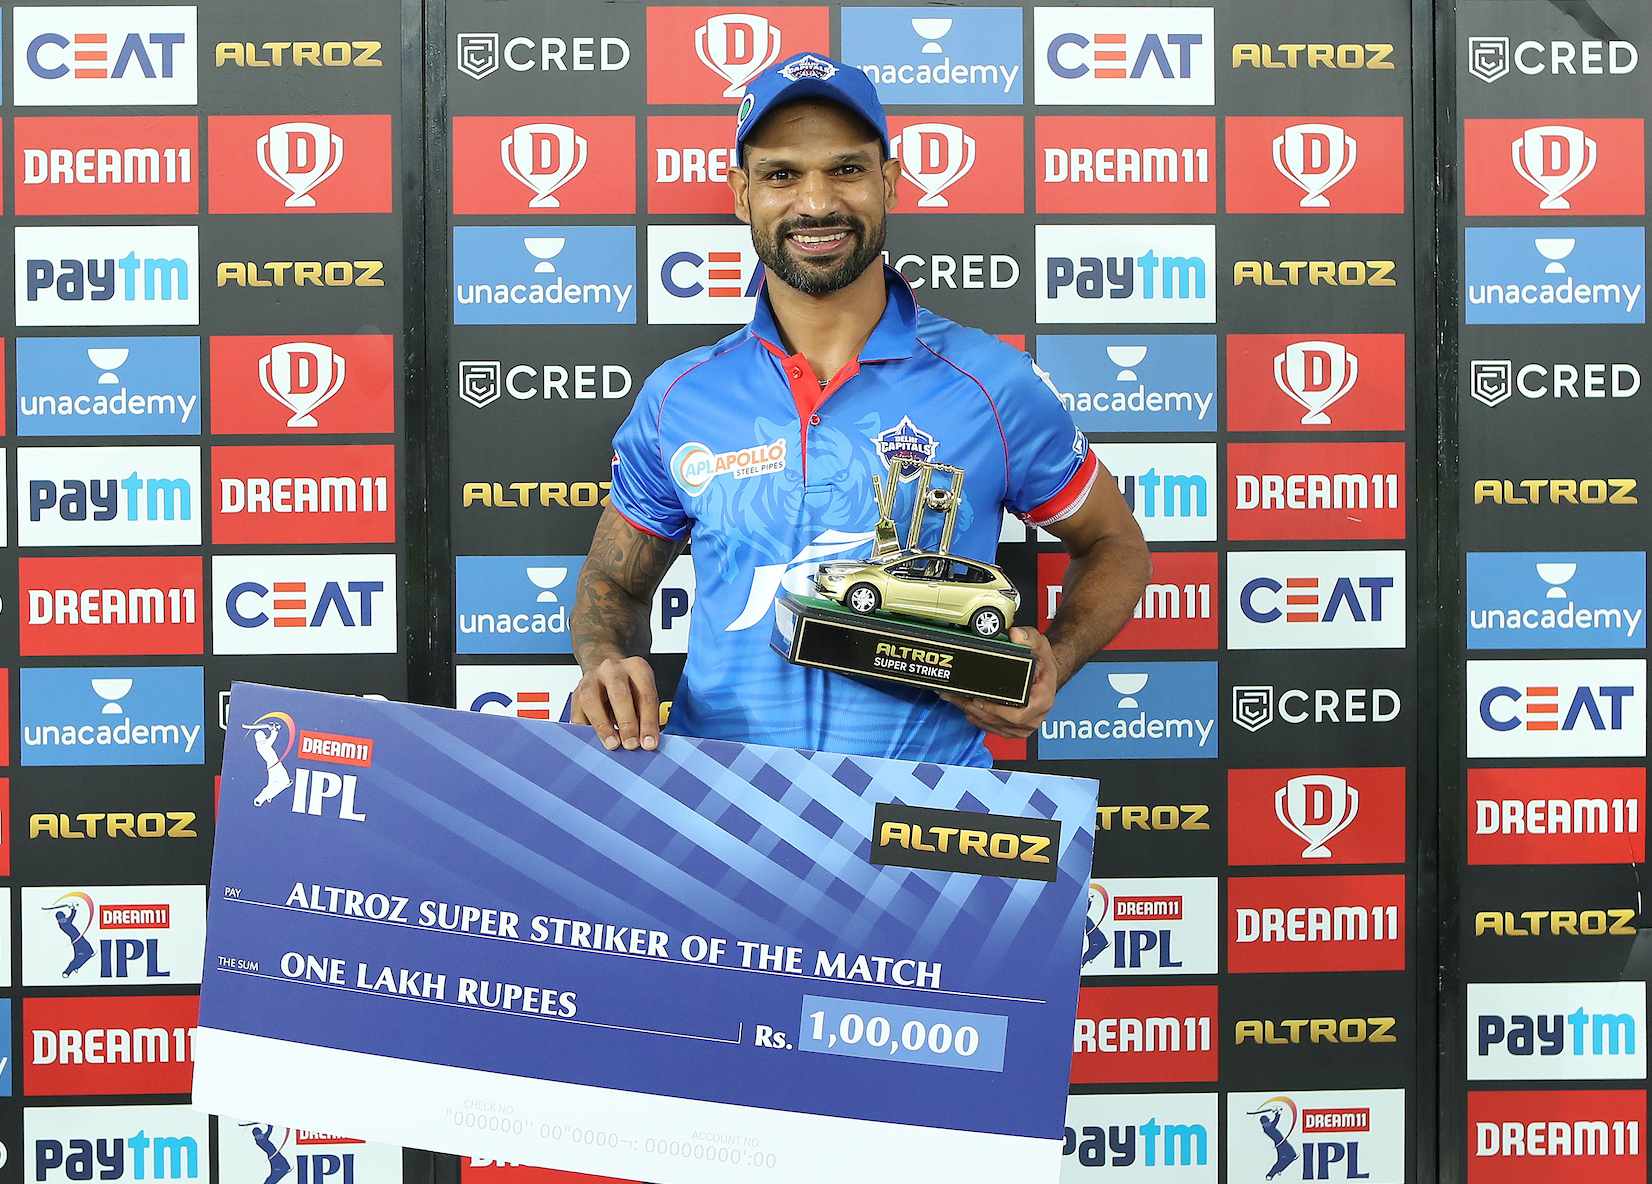 IPL 2020: Shikhar Dhawan pleased after helping Delhi Capitals win with maiden century